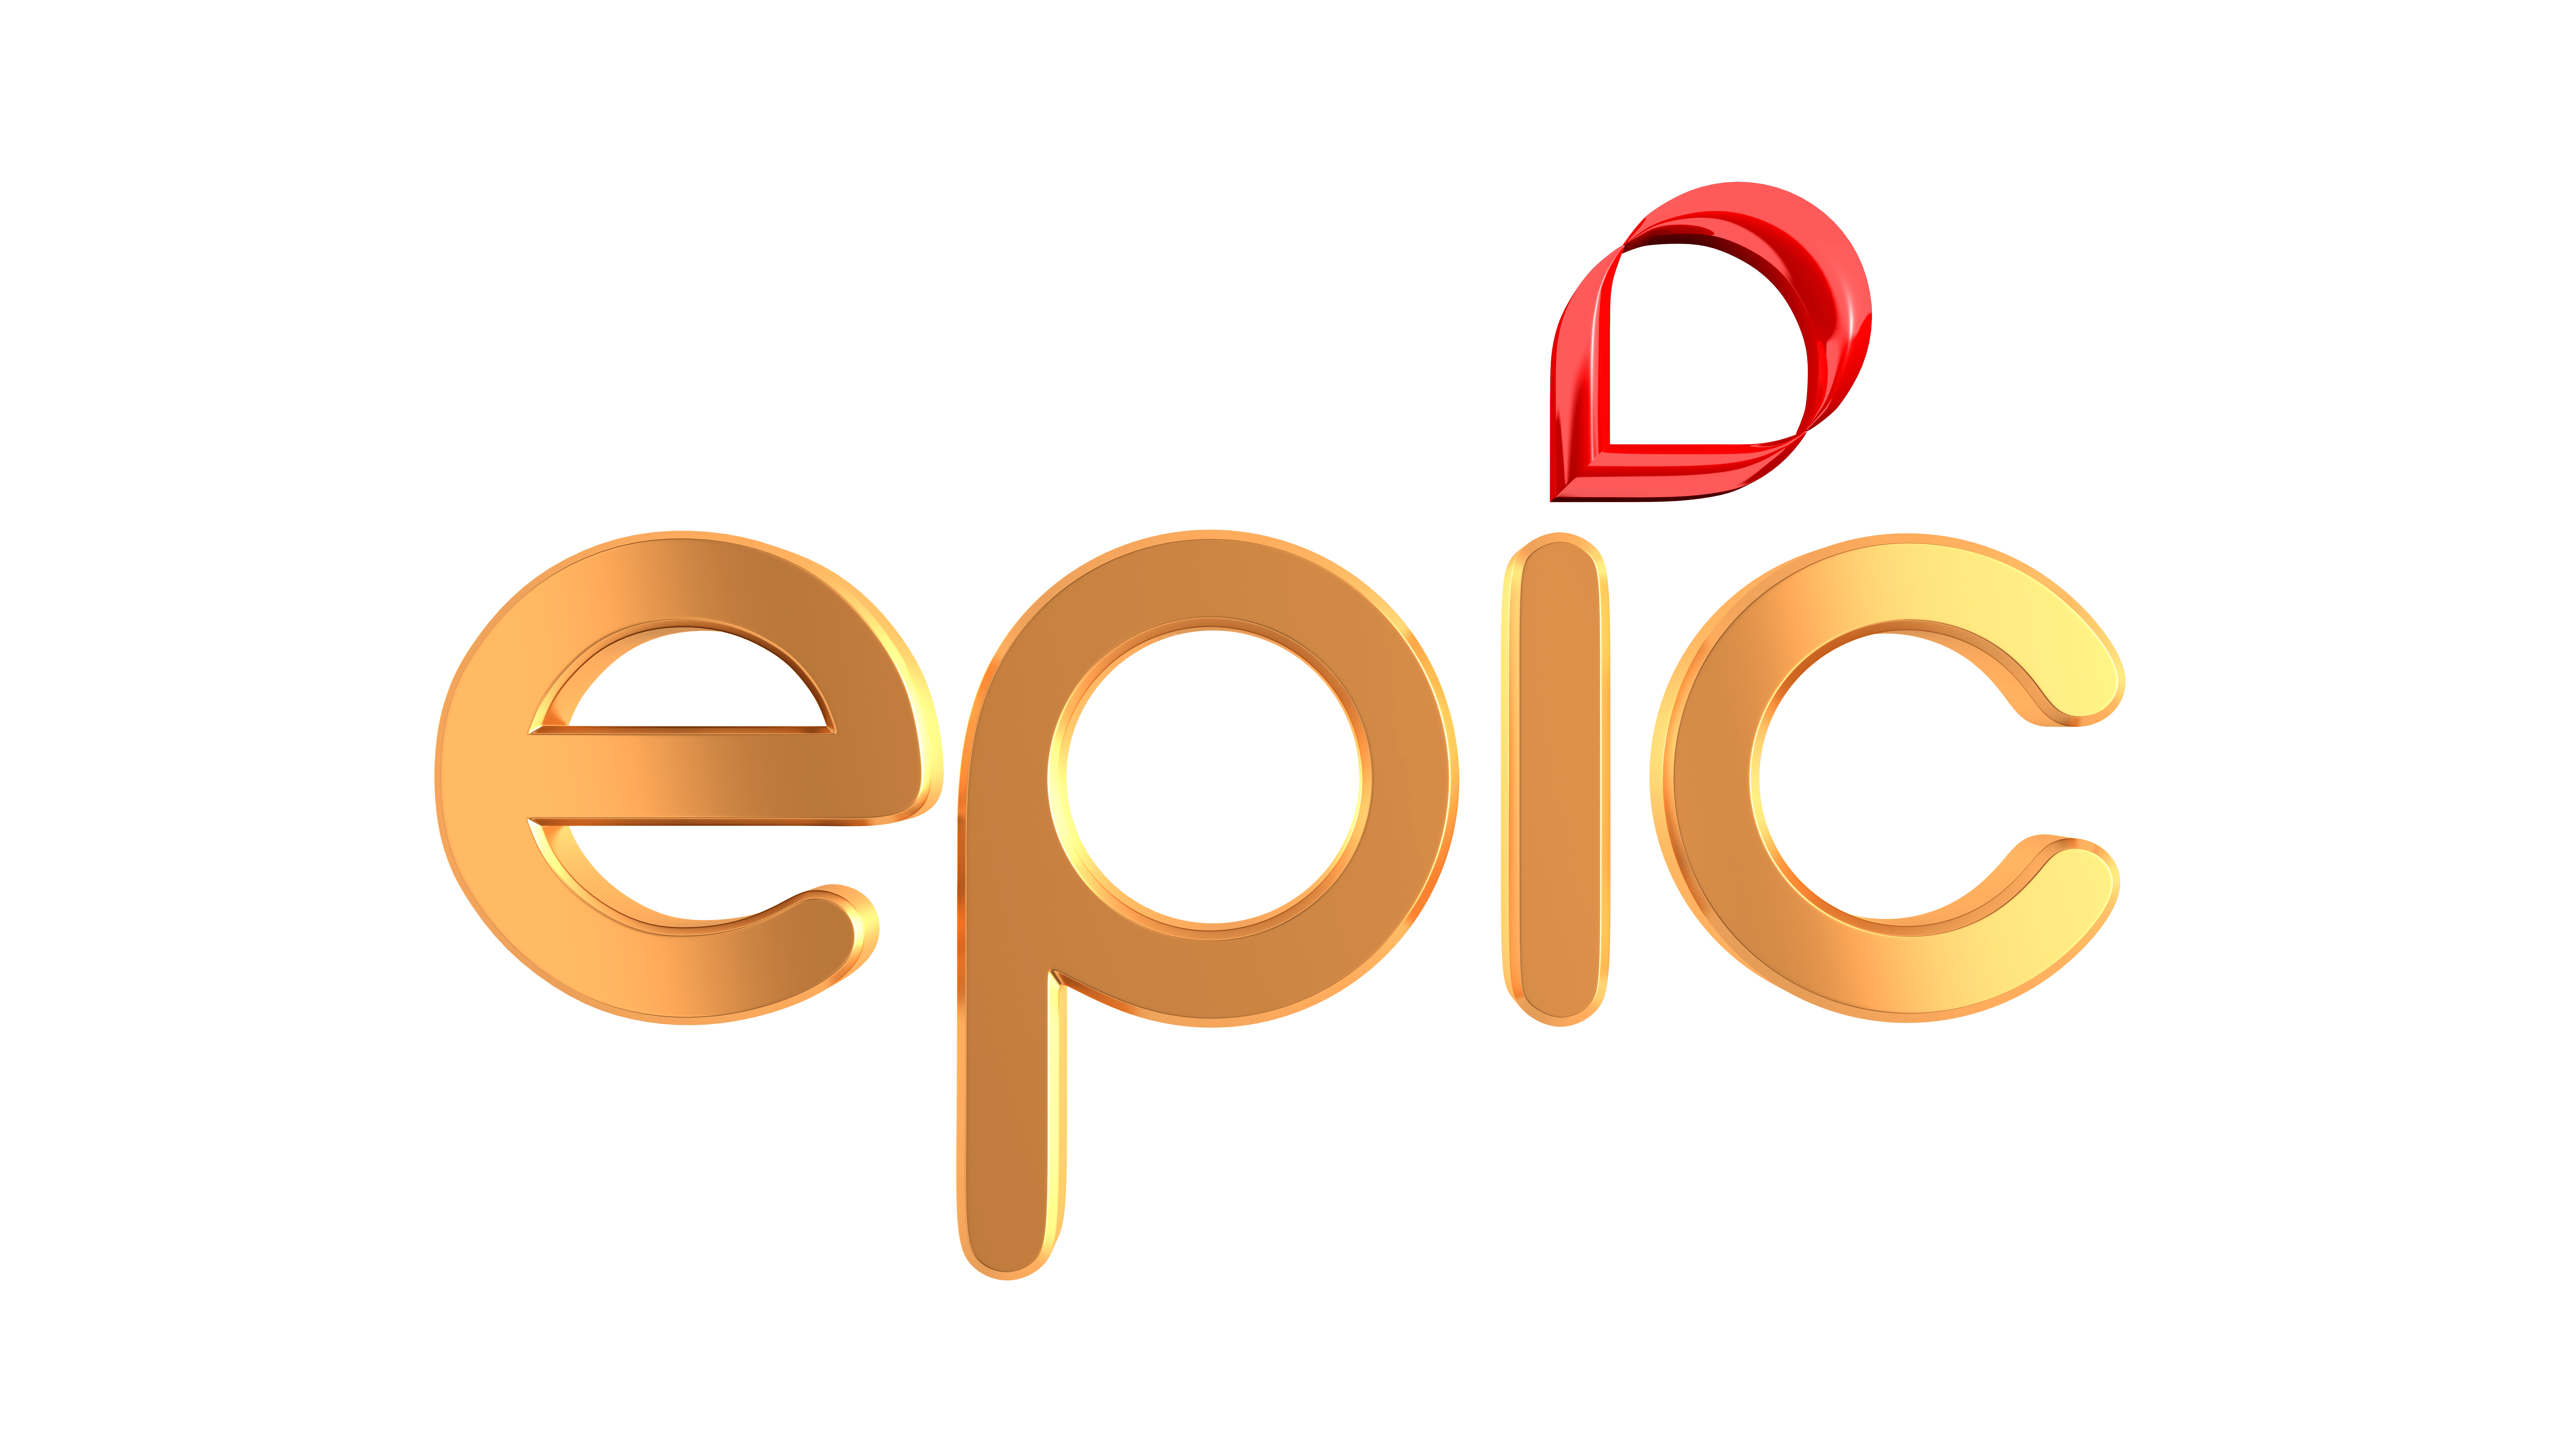 Epic Logo - File:EPIC logo for print.png - Wikimedia Commons